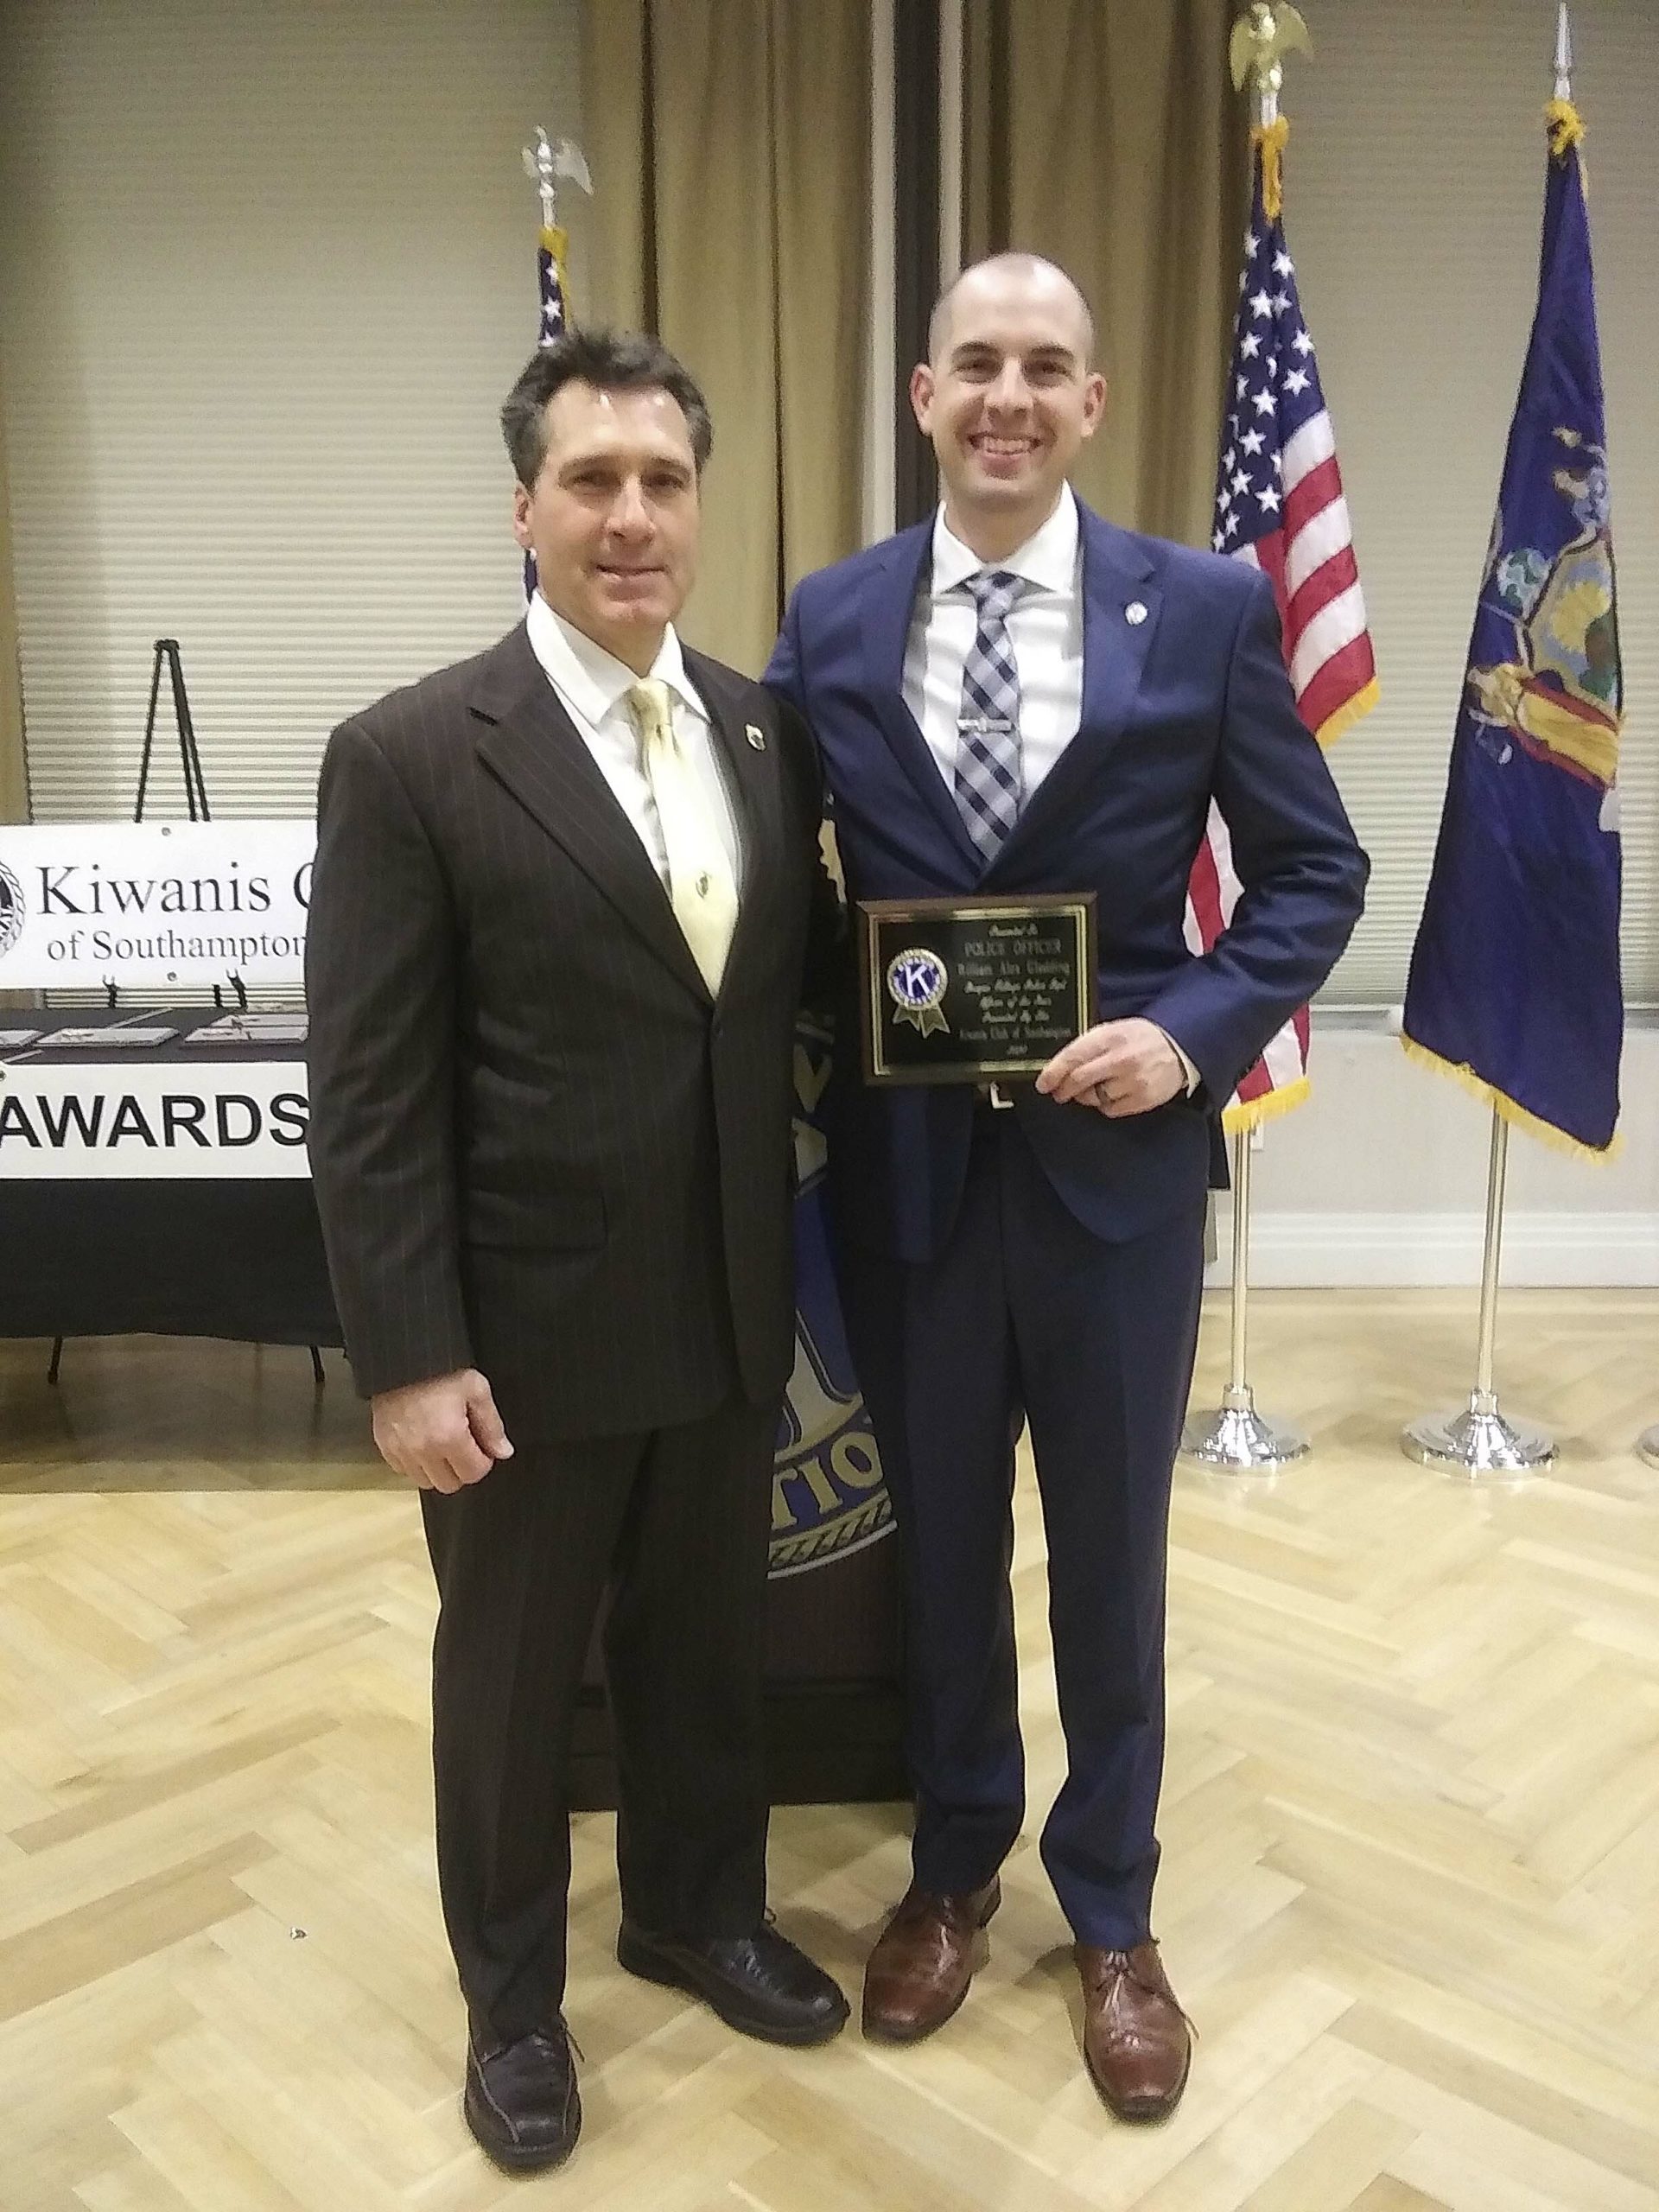 Quogue Village Police Officer William A. Gladding, right, is presented with the Southampton Kiwanis Club Police Officer of the Year Award from Quogue Village Police Chief Christopher Isola at Atlantis Banquet and Events in Riverhead on Friday evening. This is the Kiwanis Club's 50th annual ceremony recognizing local law enforcement in their individual departments. SONDRA ROSANTE